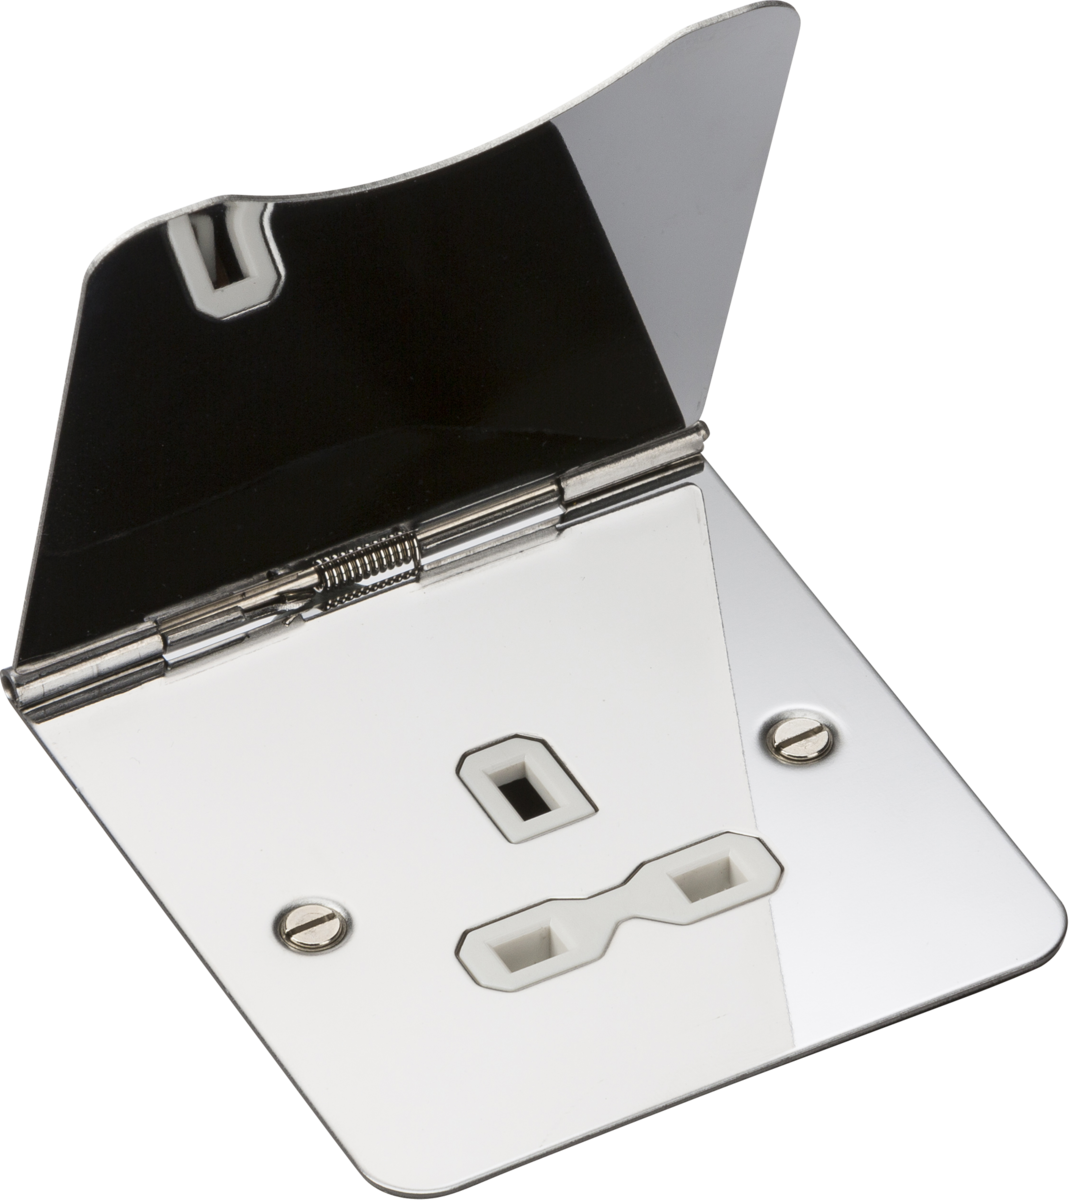 13A 1G unswitched floor socket - polished chrome with white insert